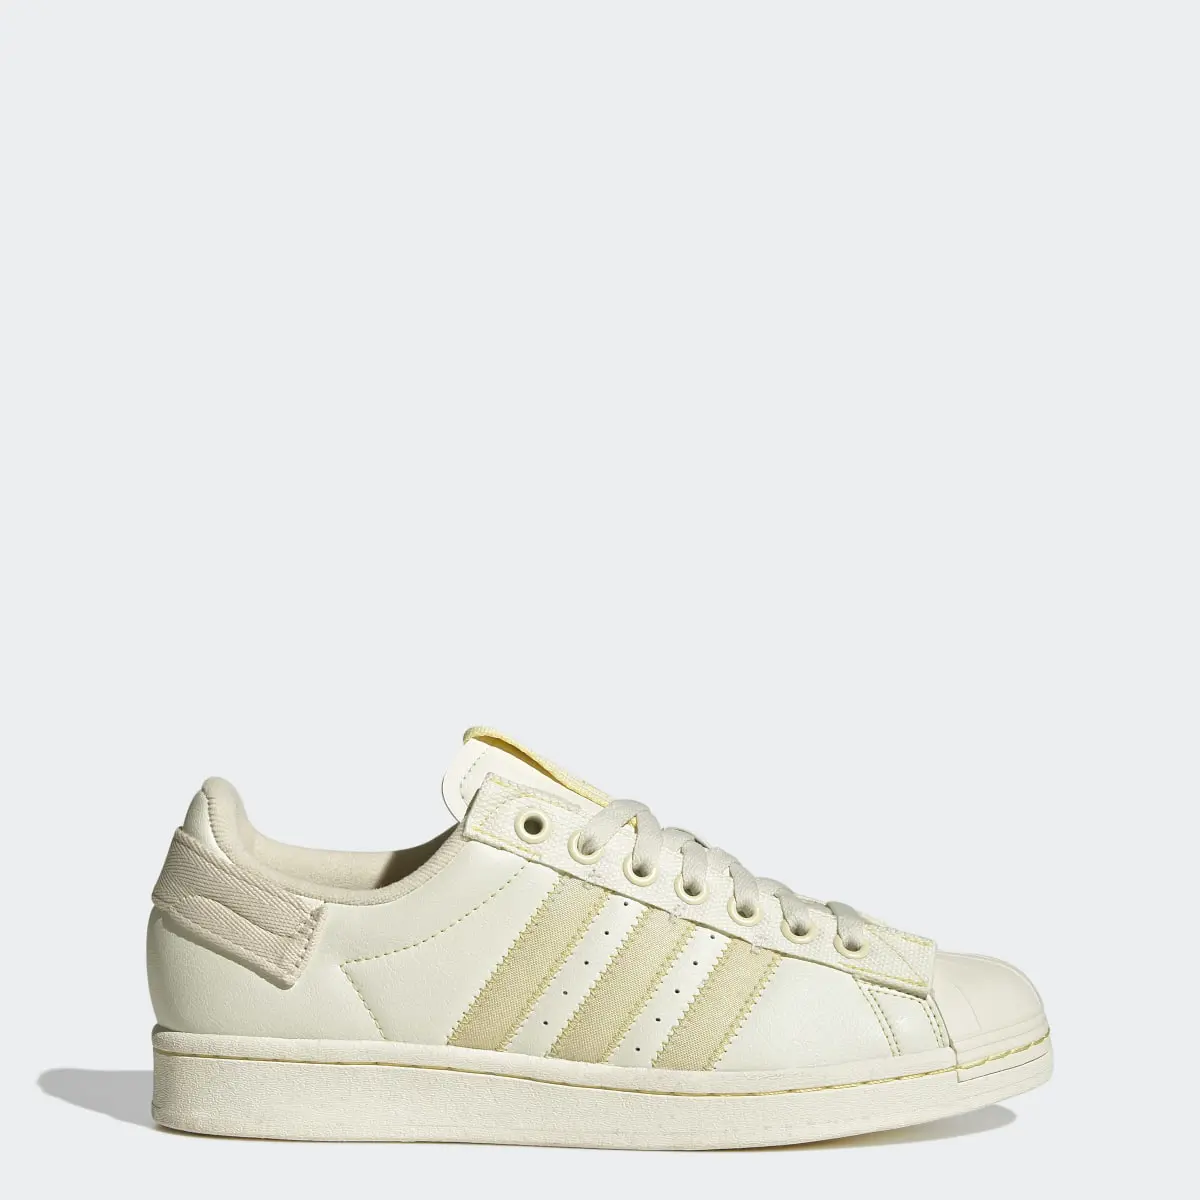 Adidas Superstar Parley Shoes. 1